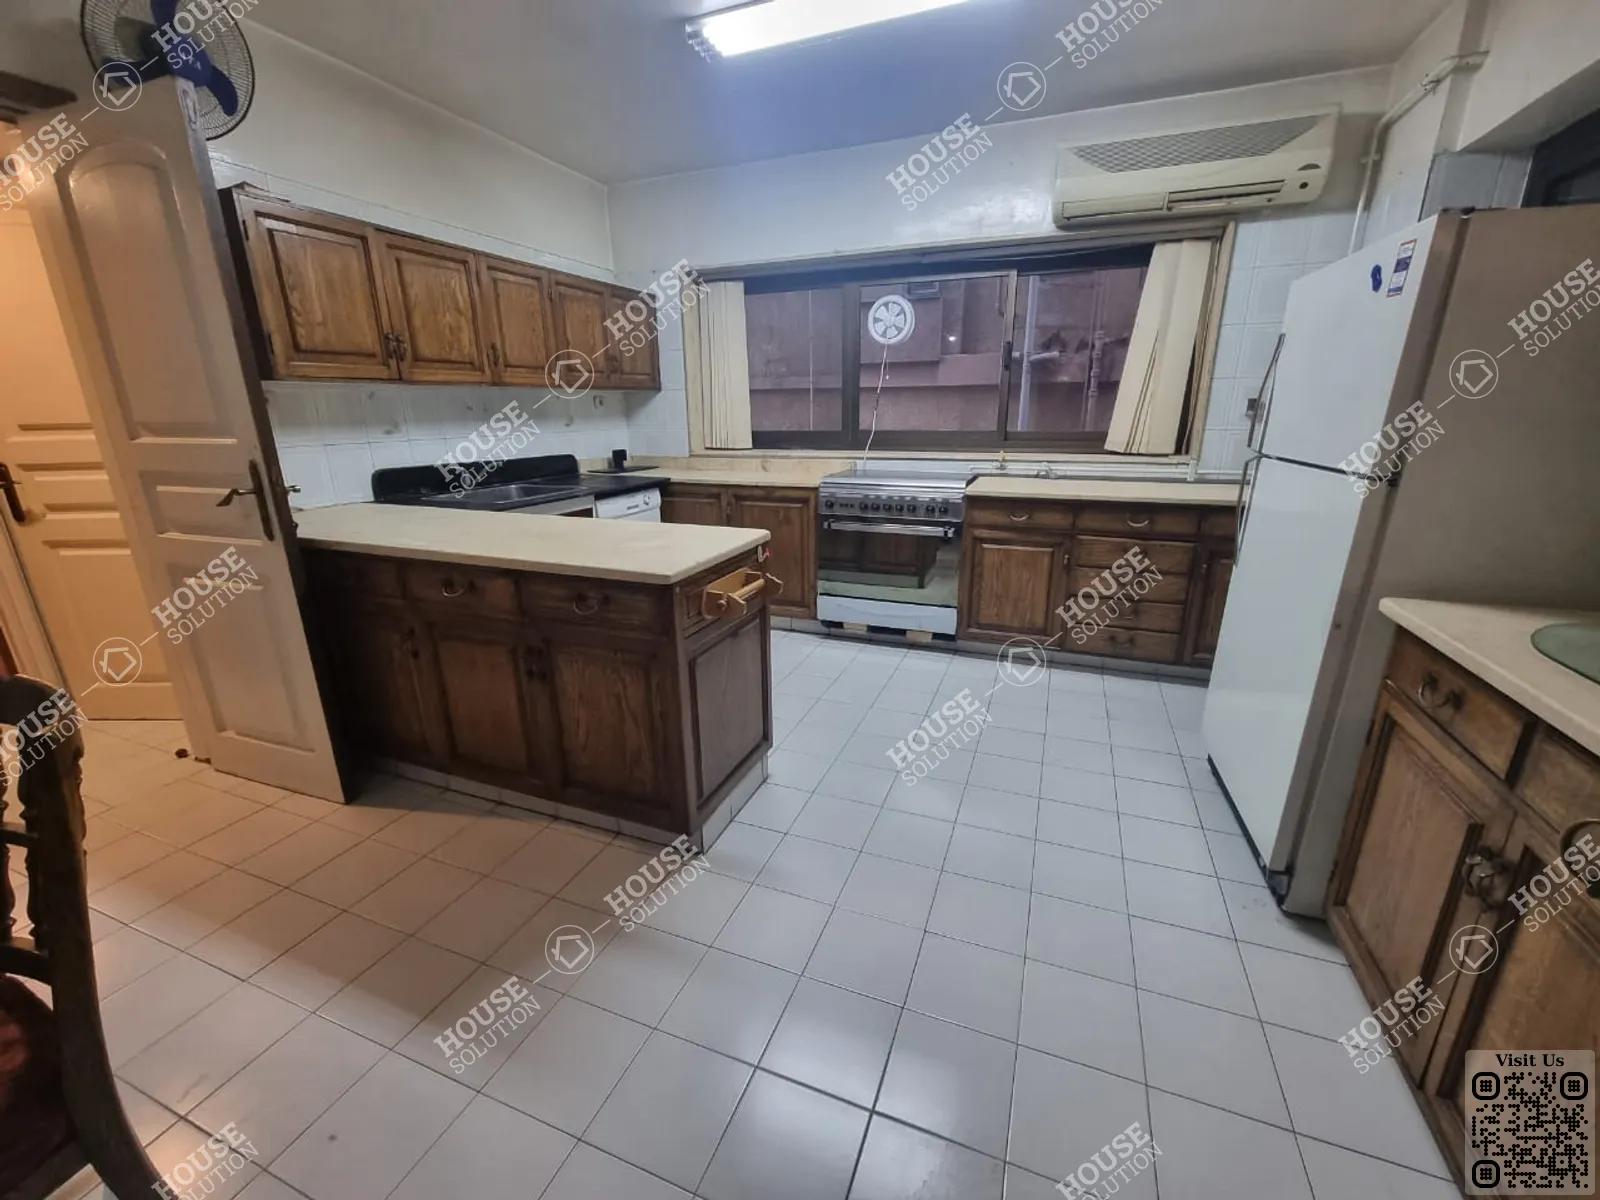 KITCHEN  @ Apartments For Rent In Maadi Maadi Sarayat Area: 240 m² consists of 3 Bedrooms 2 Bathrooms Furnished 5 stars #2905-1